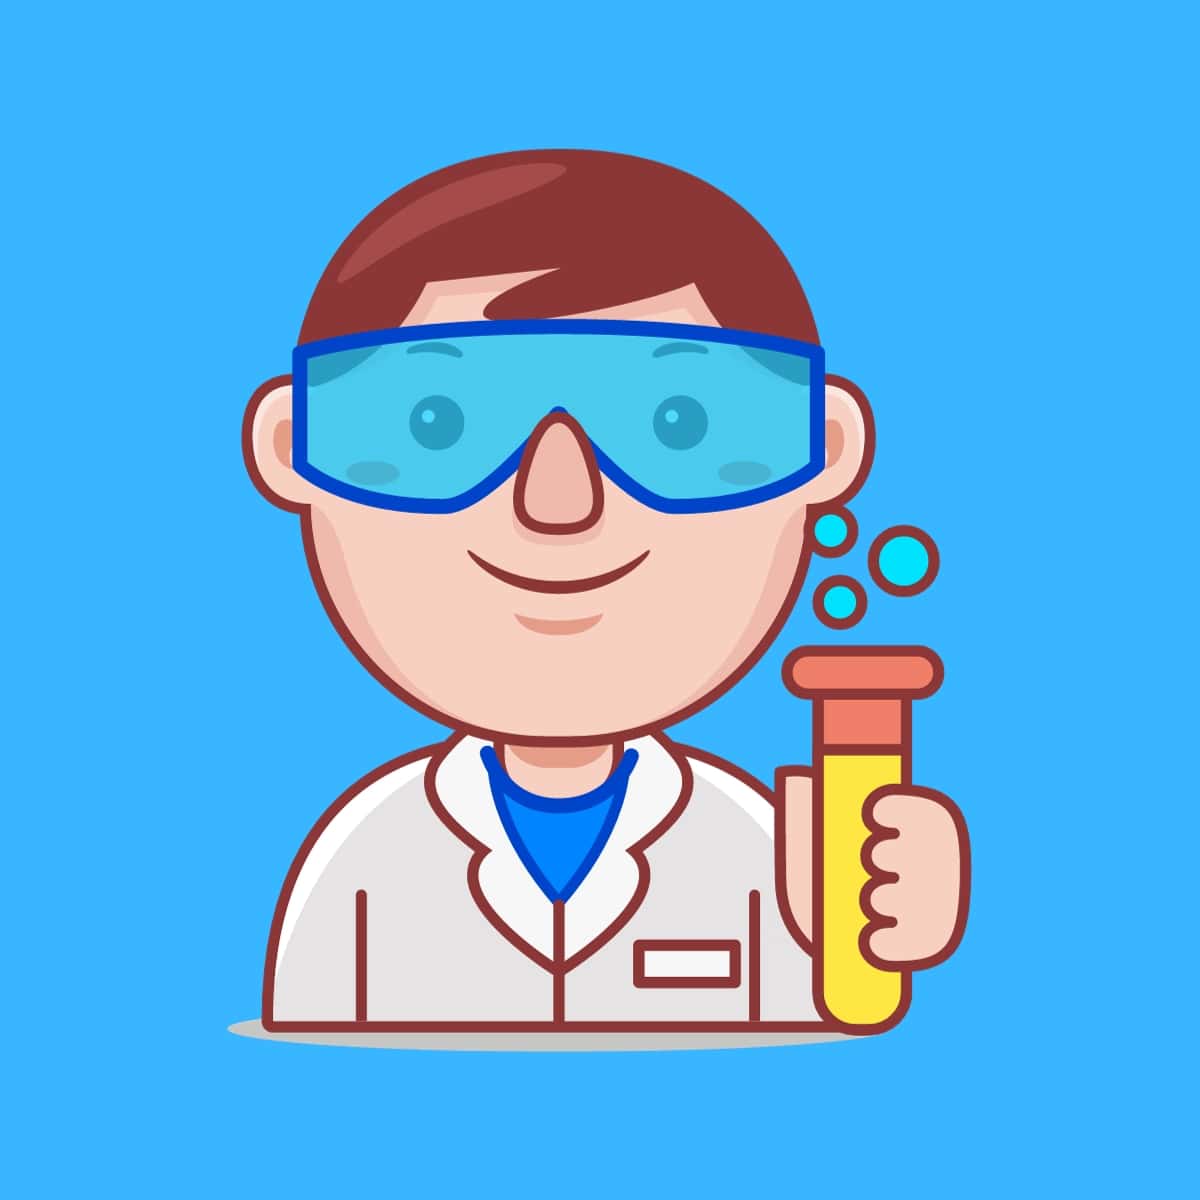 Cartoon graphic of scientist holding tube on blue background.